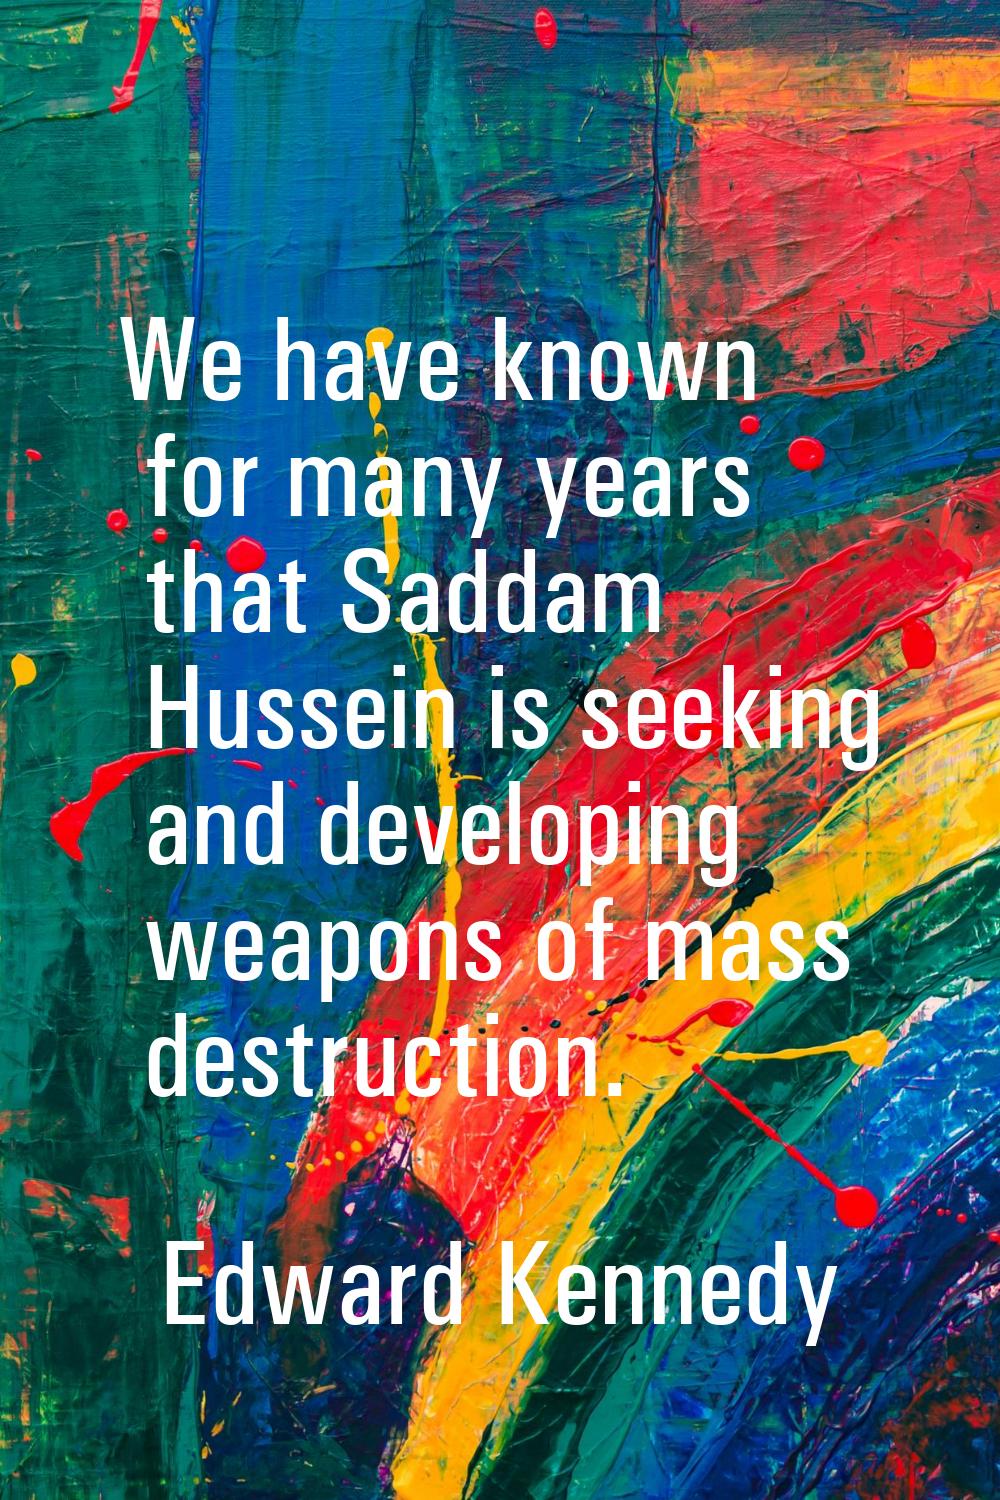 We have known for many years that Saddam Hussein is seeking and developing weapons of mass destruct